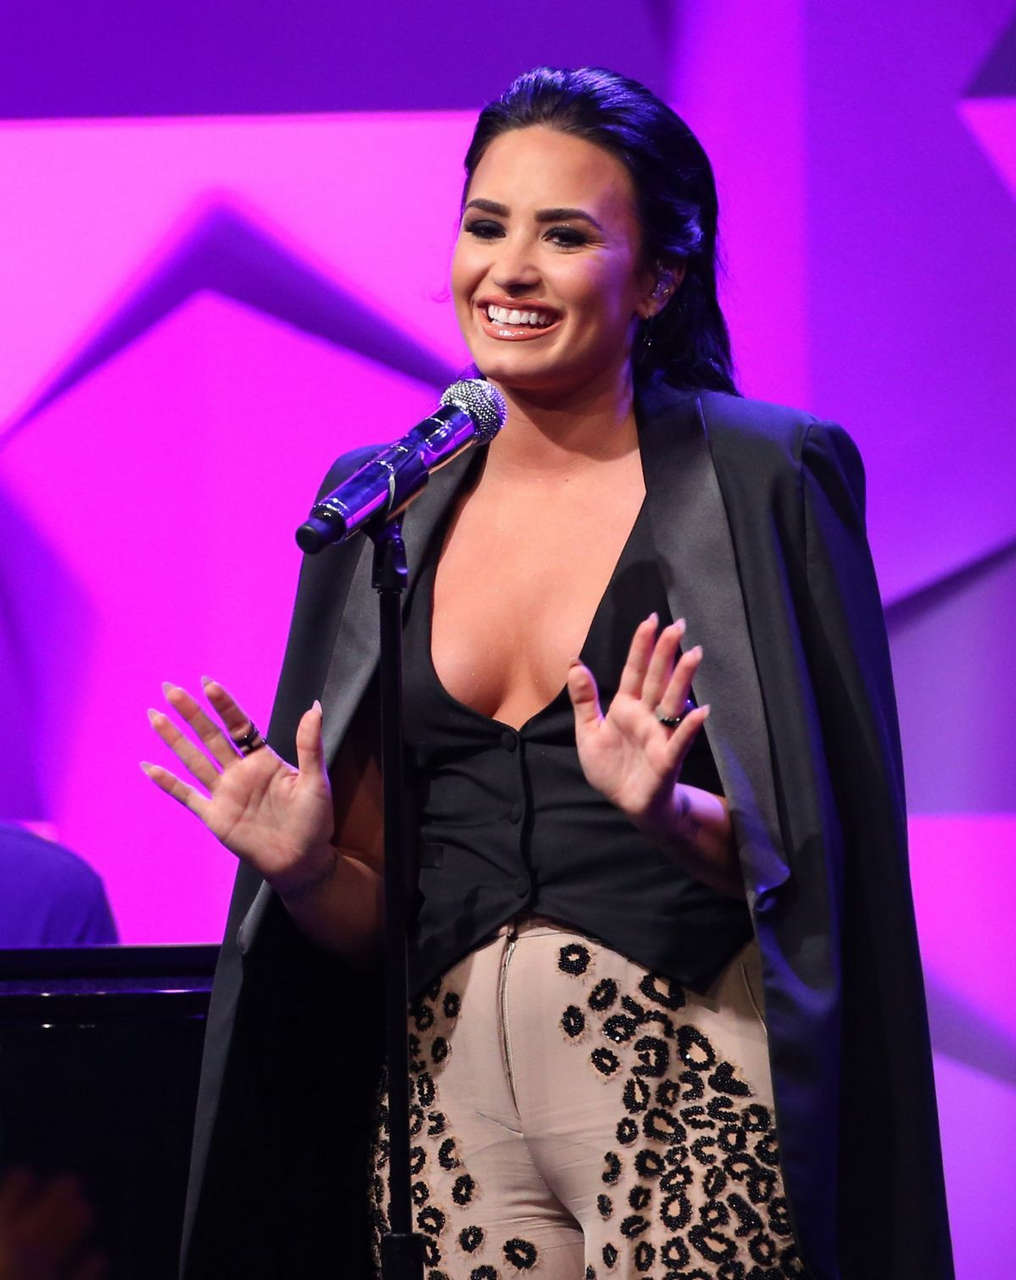 Demi Lovato Performs 27th Annual Glaad Media Awards Beverly Hills